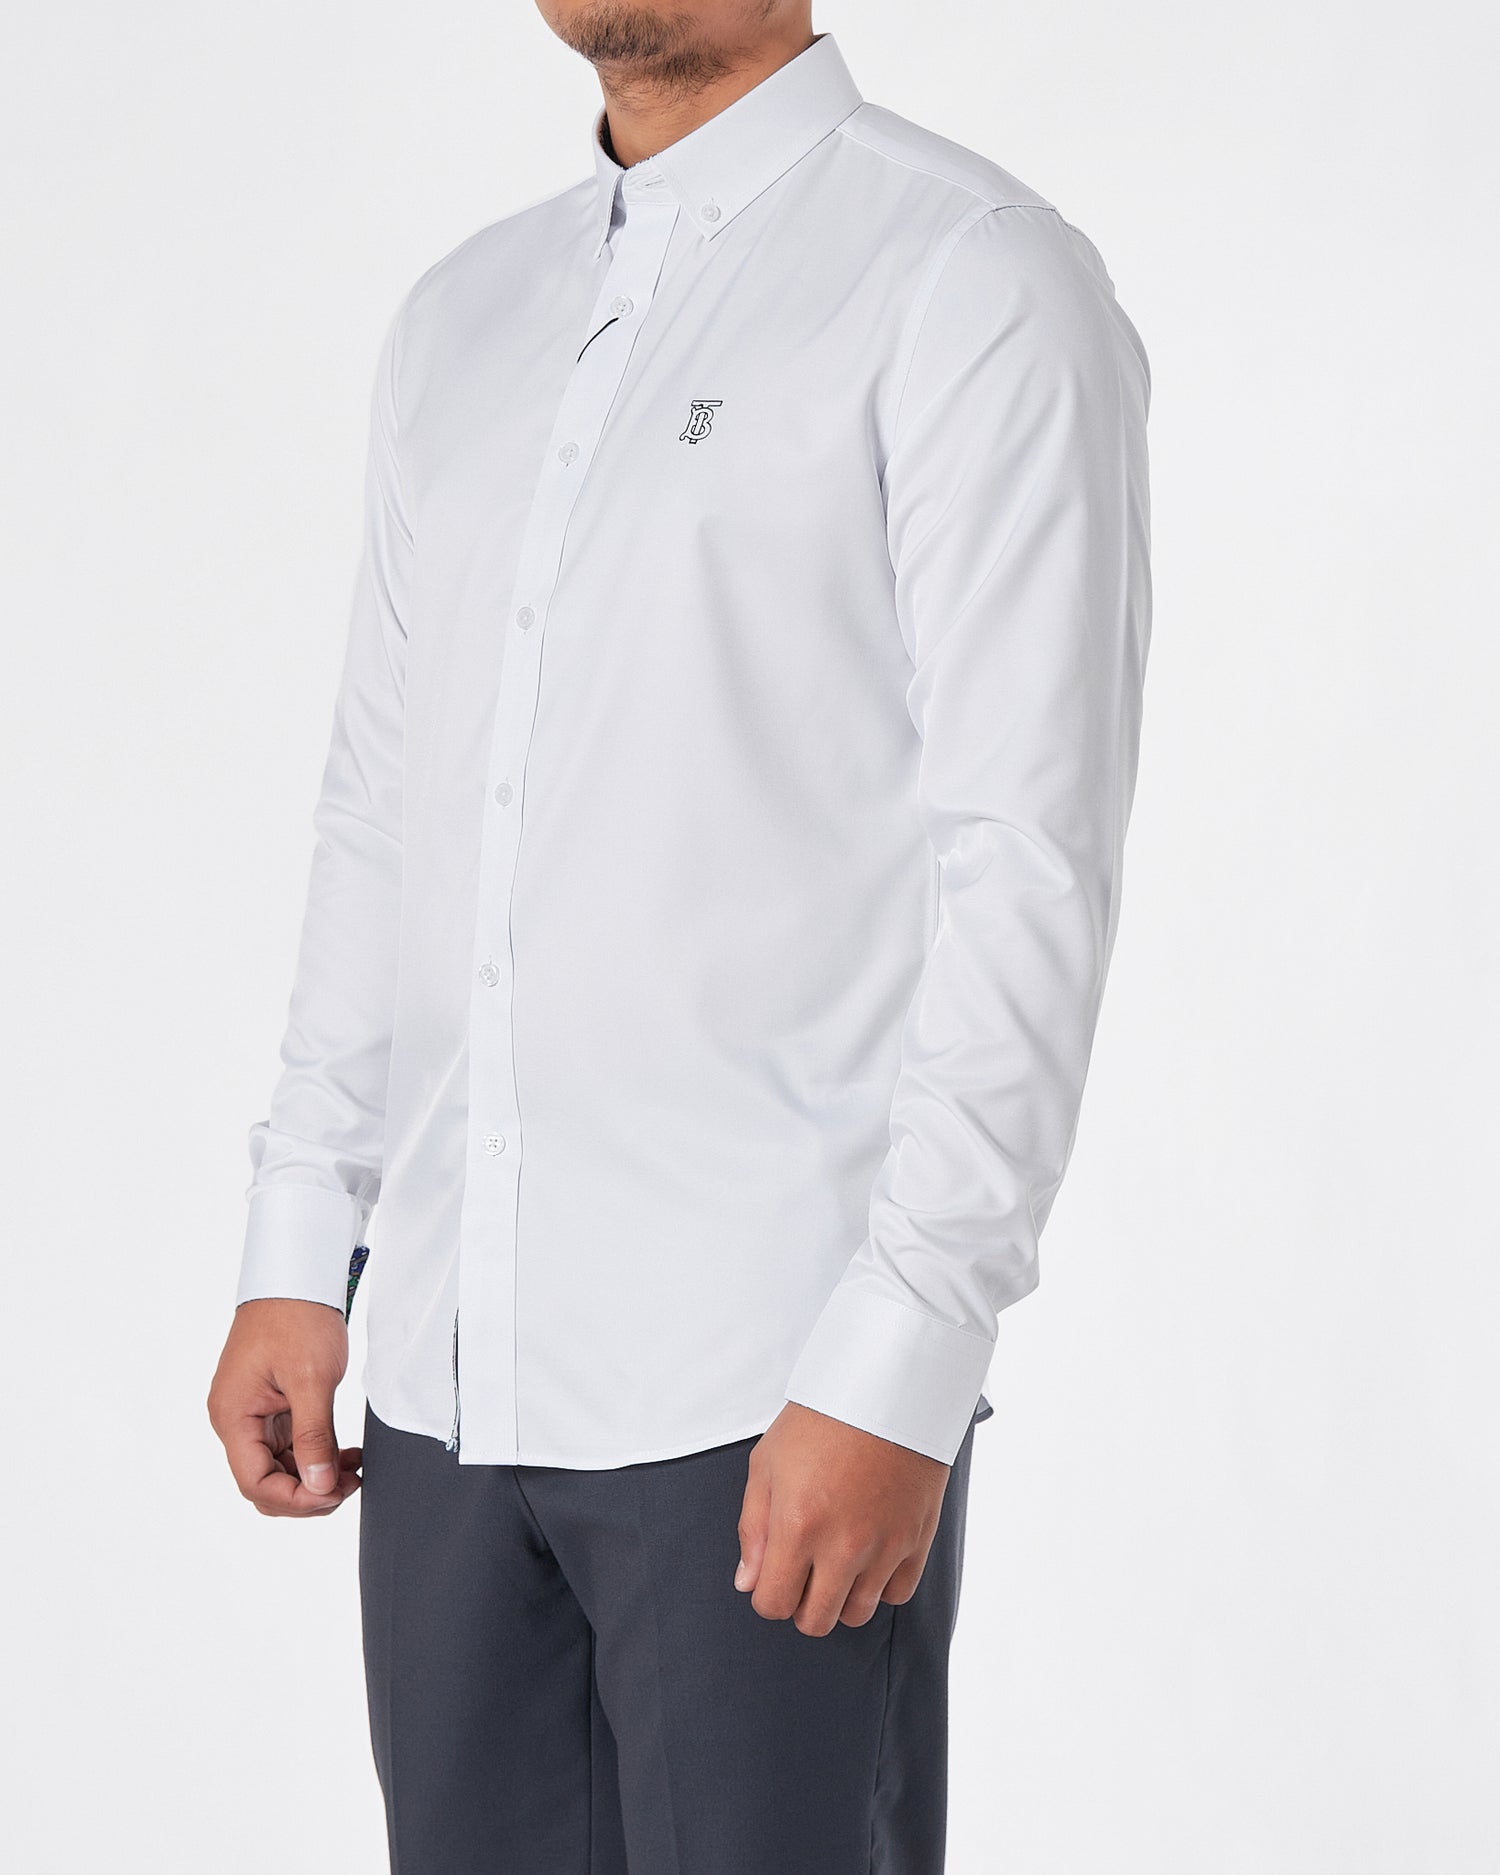 BUR Casual Fit Logo Embroidered Men White Shirts Long Sleeve 22.90